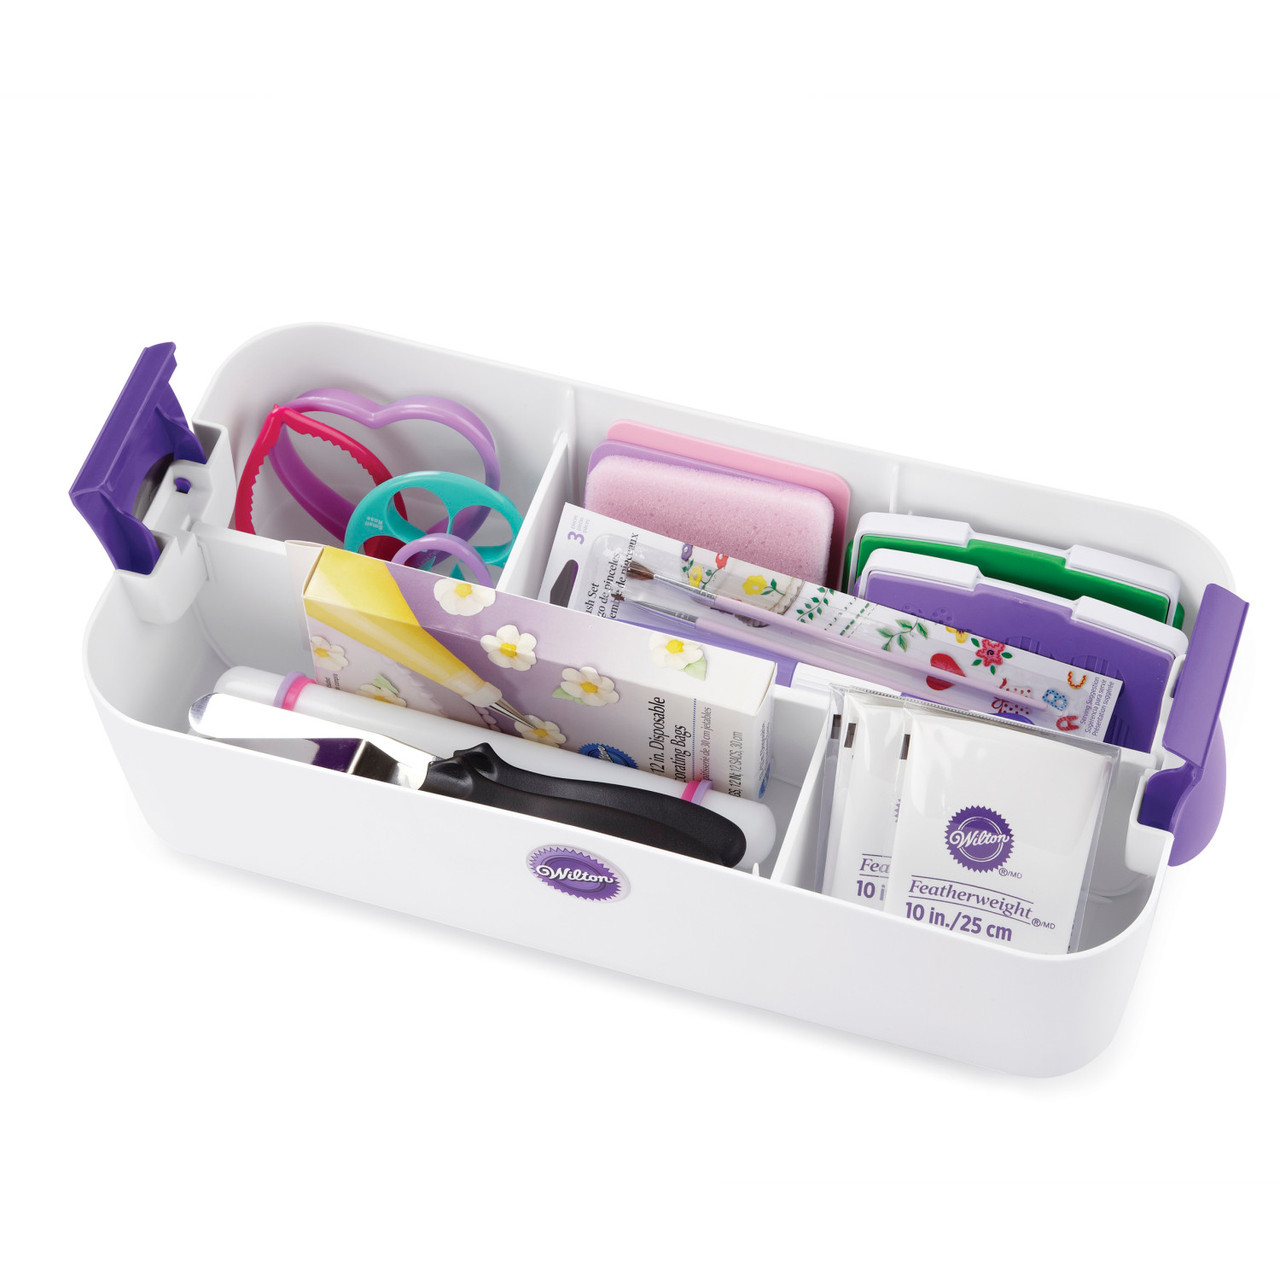  Wilton Tool Caddies, Assorted, White and Purple: Icing Tip  Case: Home & Kitchen